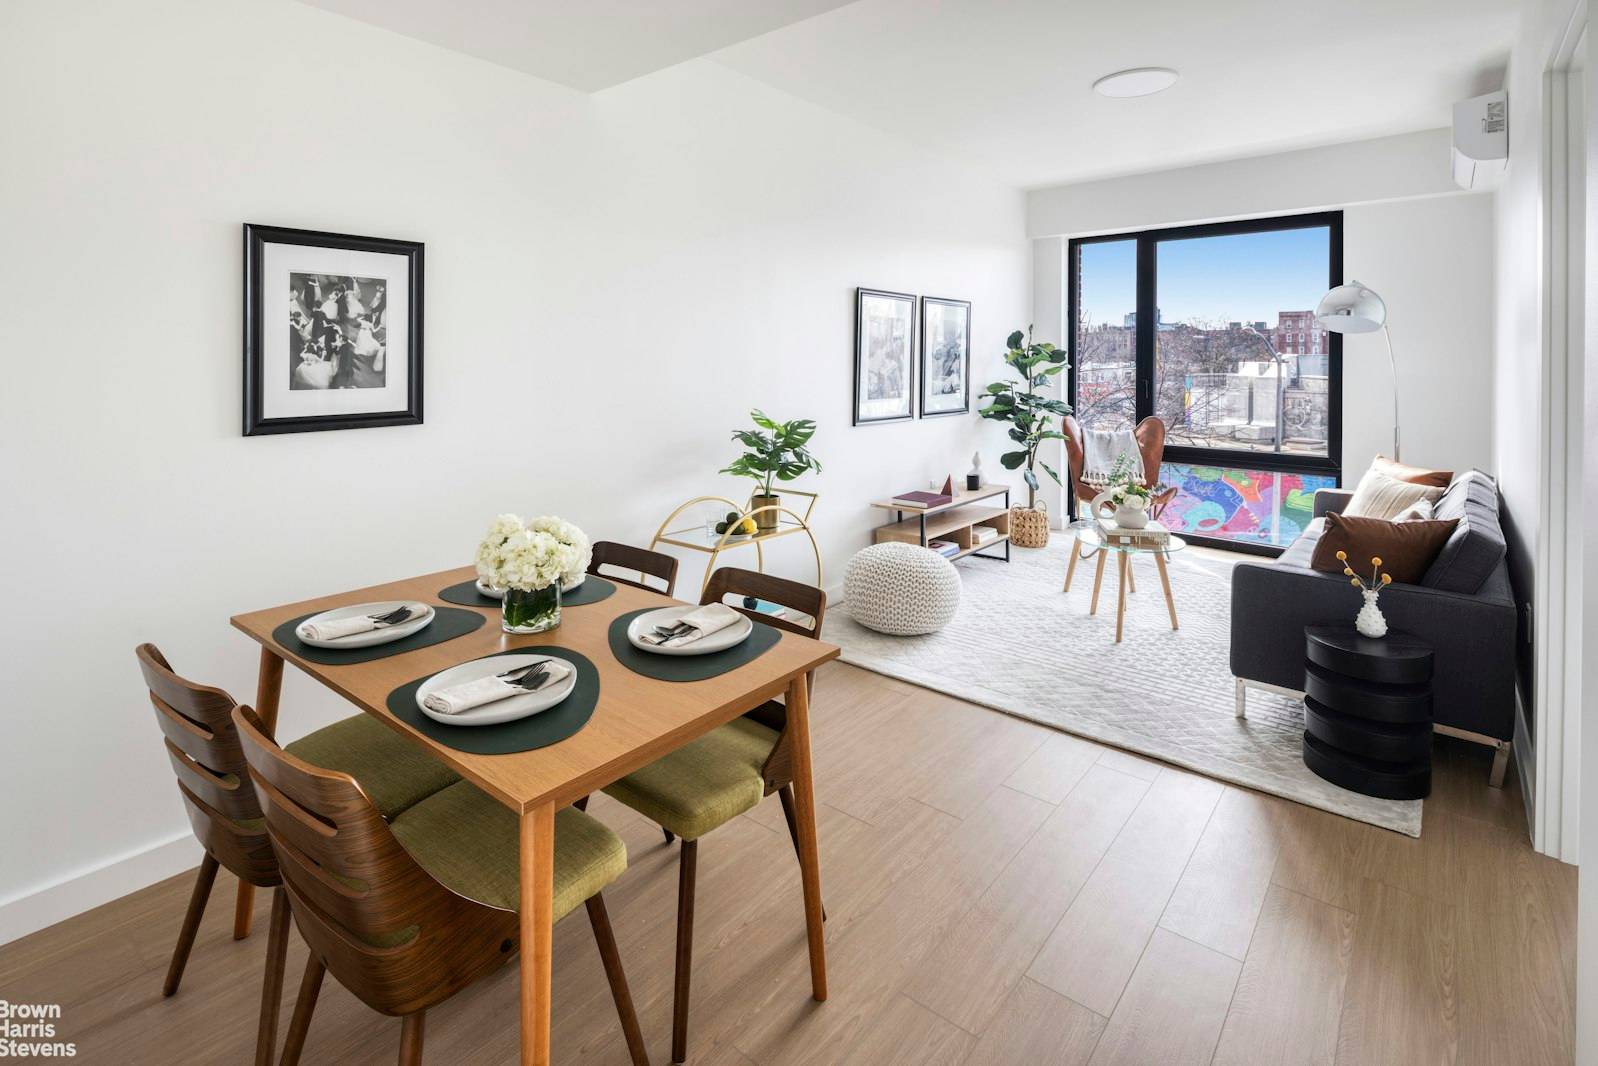 Welcome to One Sullivan Place, a newly constructed luxury rental building located at the cross roads between historic Crown Heights and trendy Prospect Lefferts Garden.